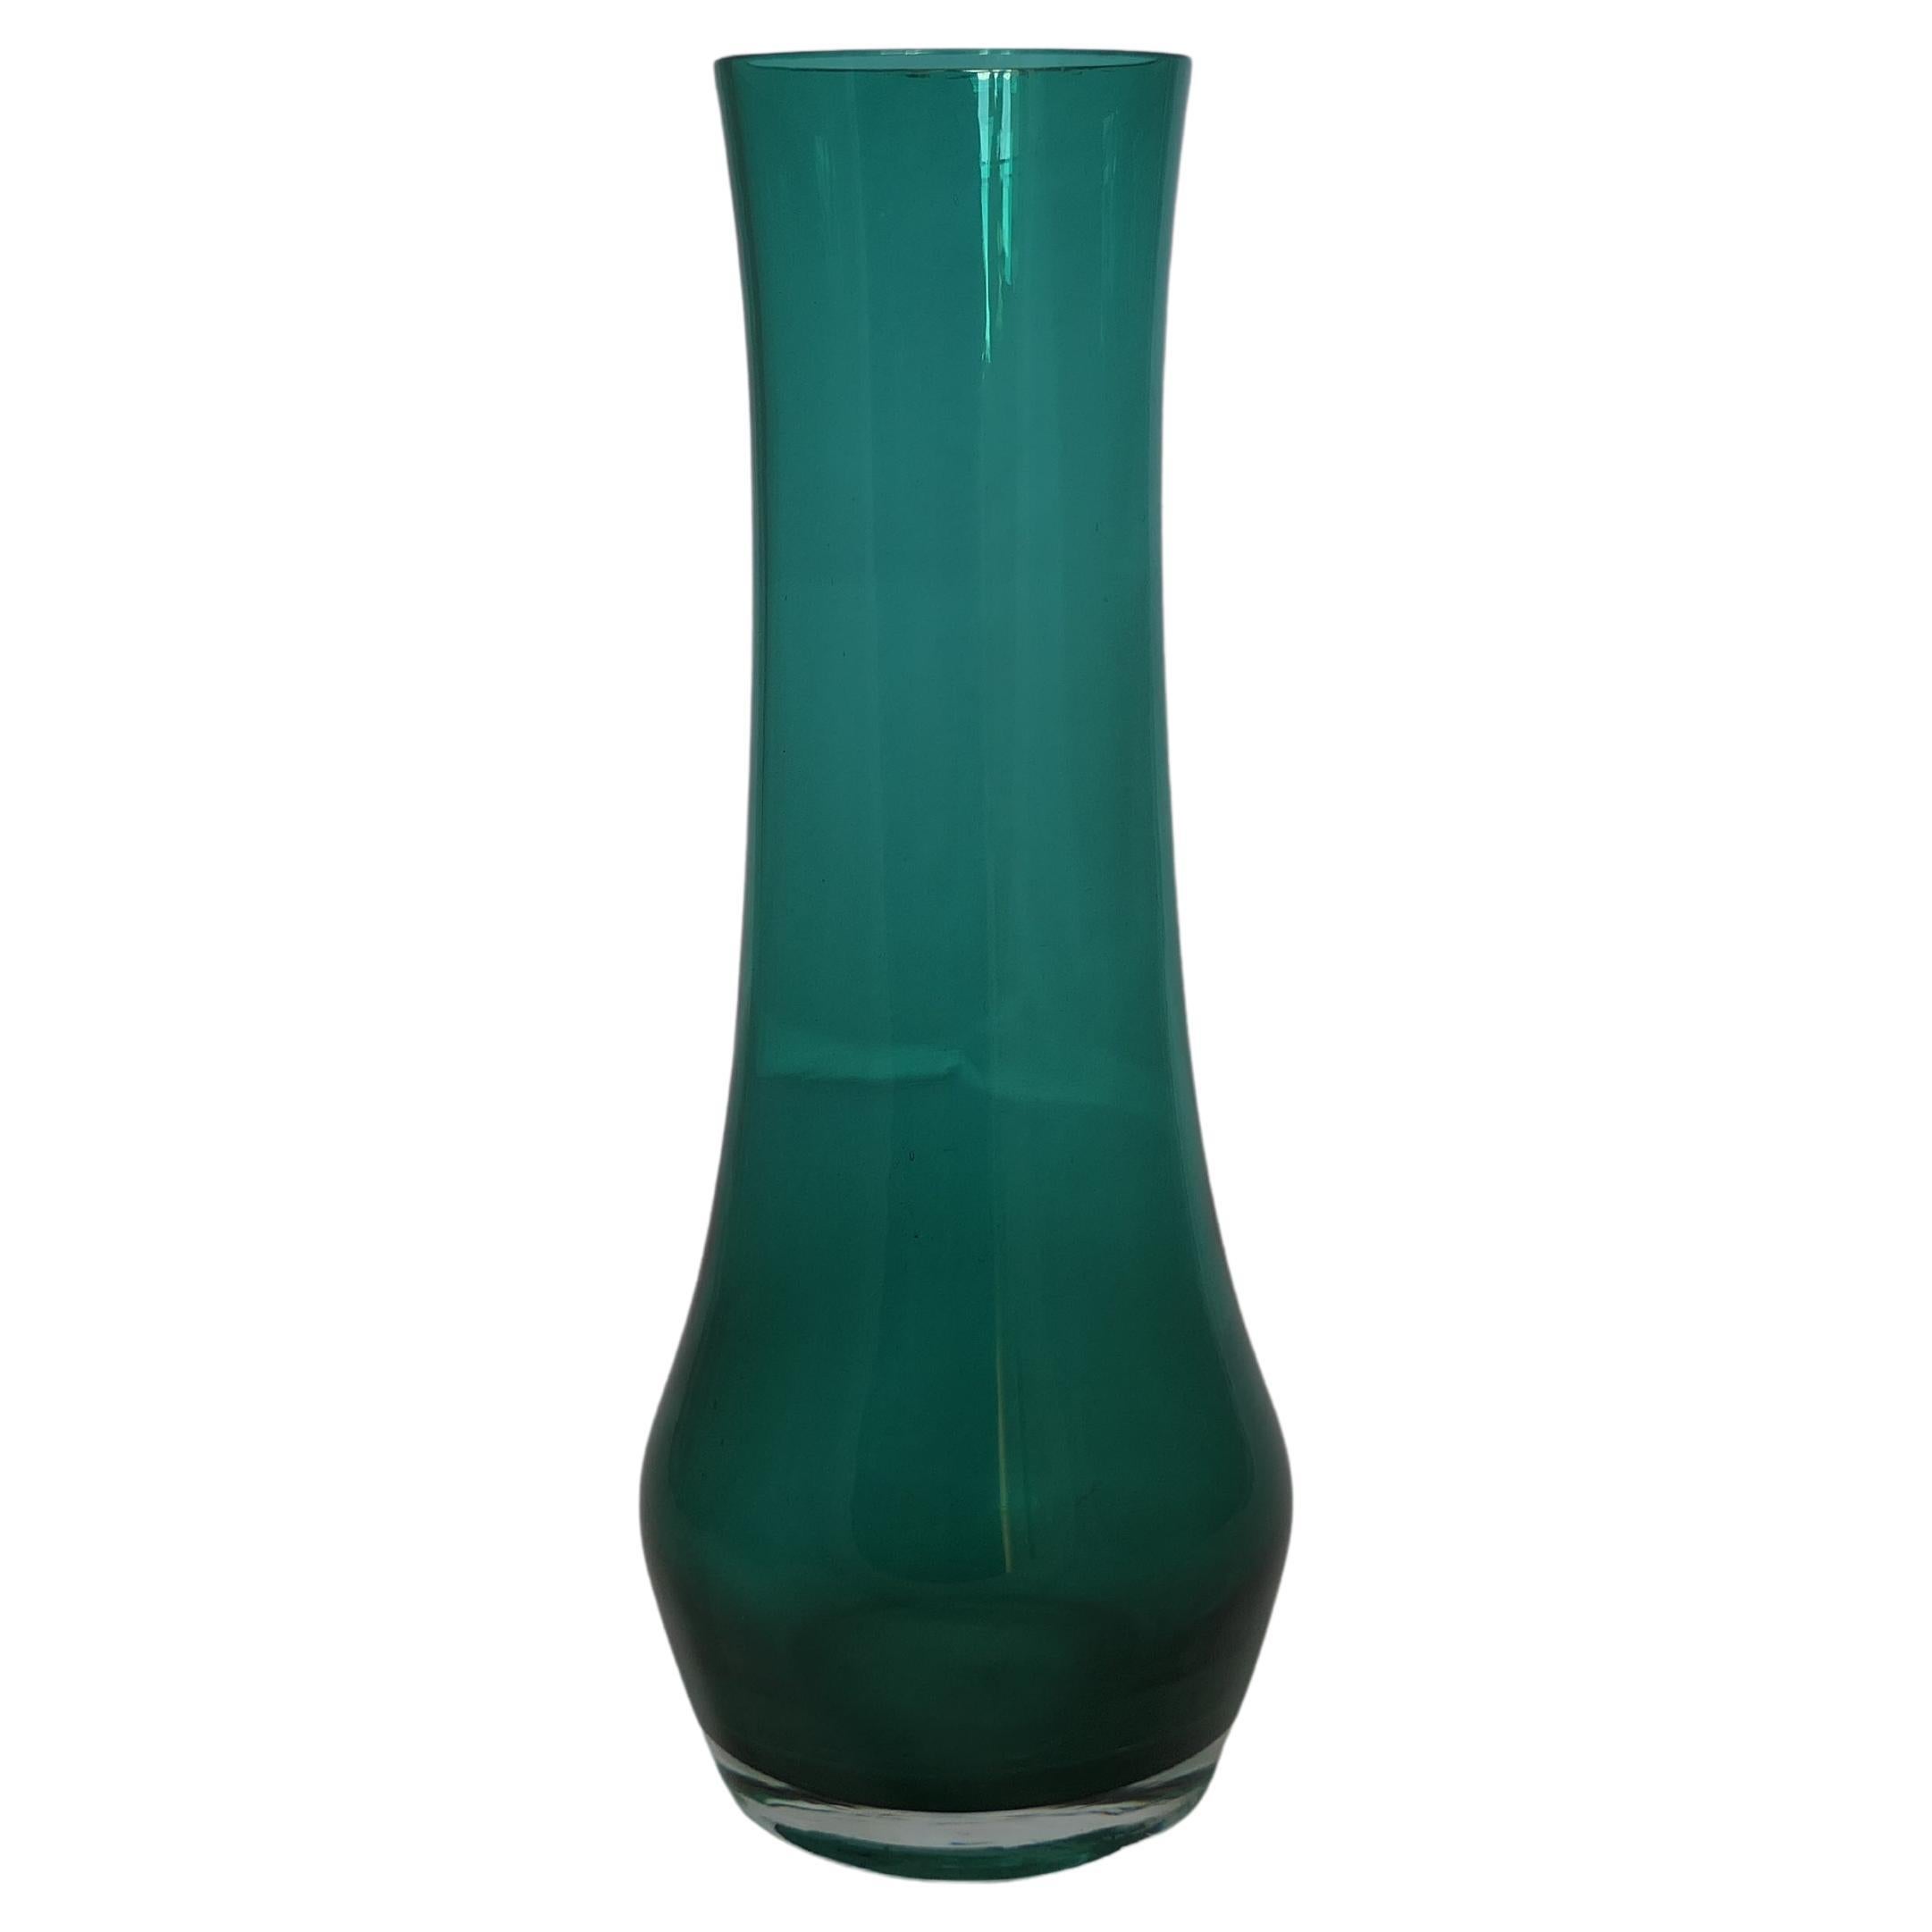 1960s Green Glass Vase by Tamara Aladin for Riihimäen Lasi Oy      For Sale